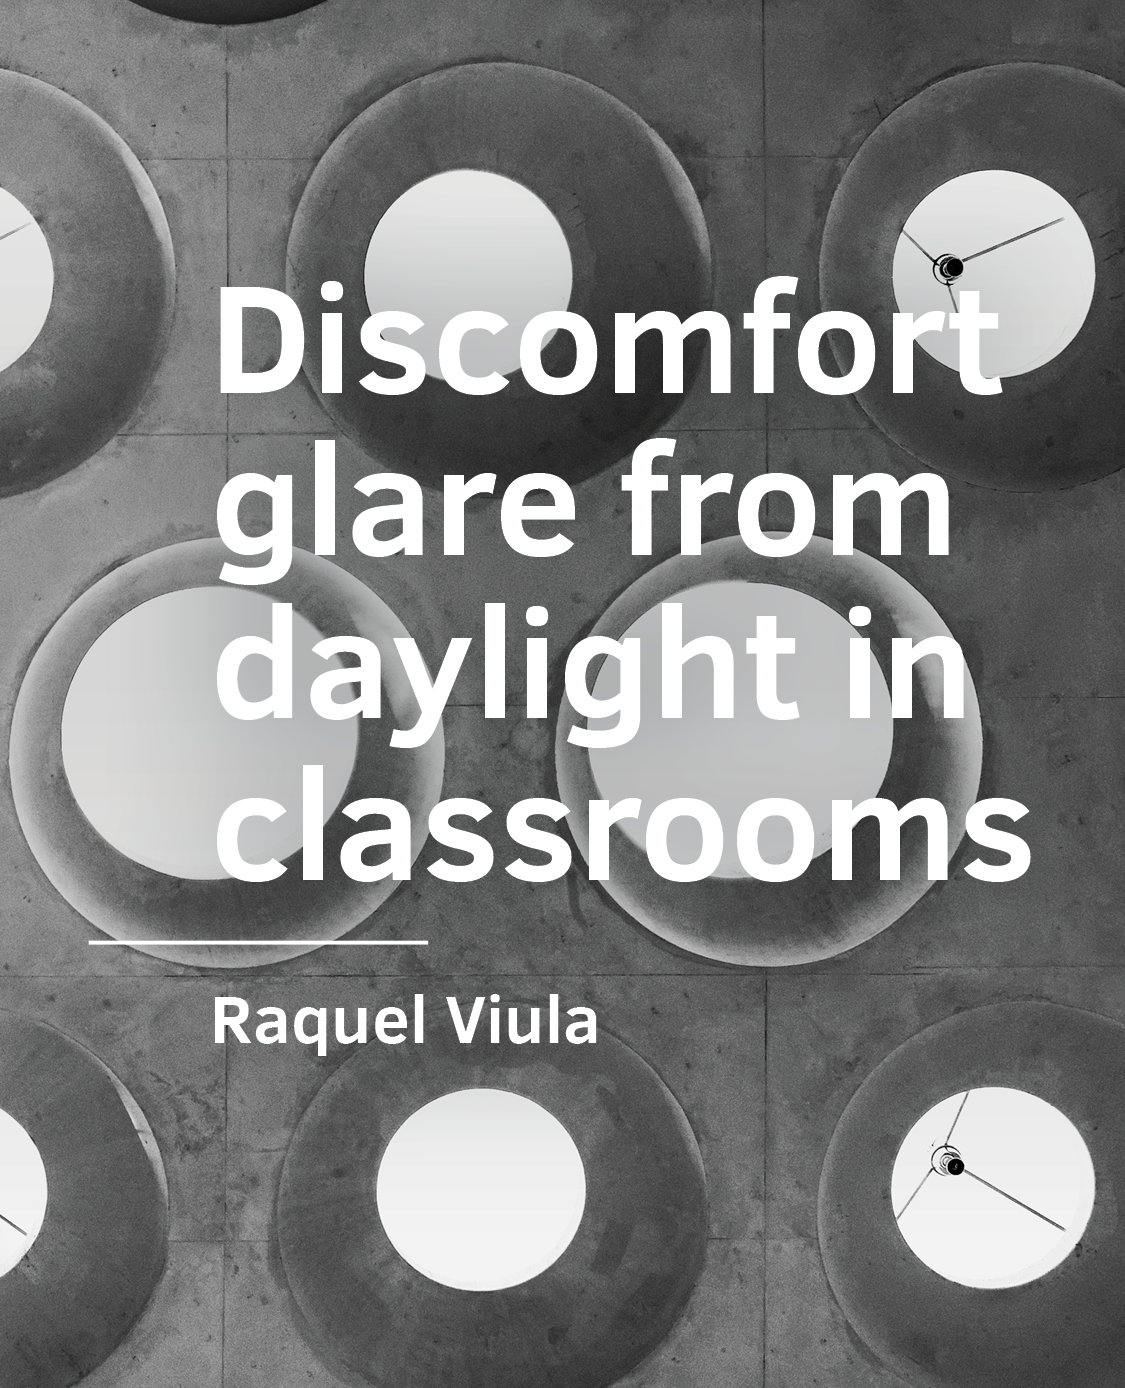 					View No. 14 (2022): Discomfort glare from daylight in classrooms
				